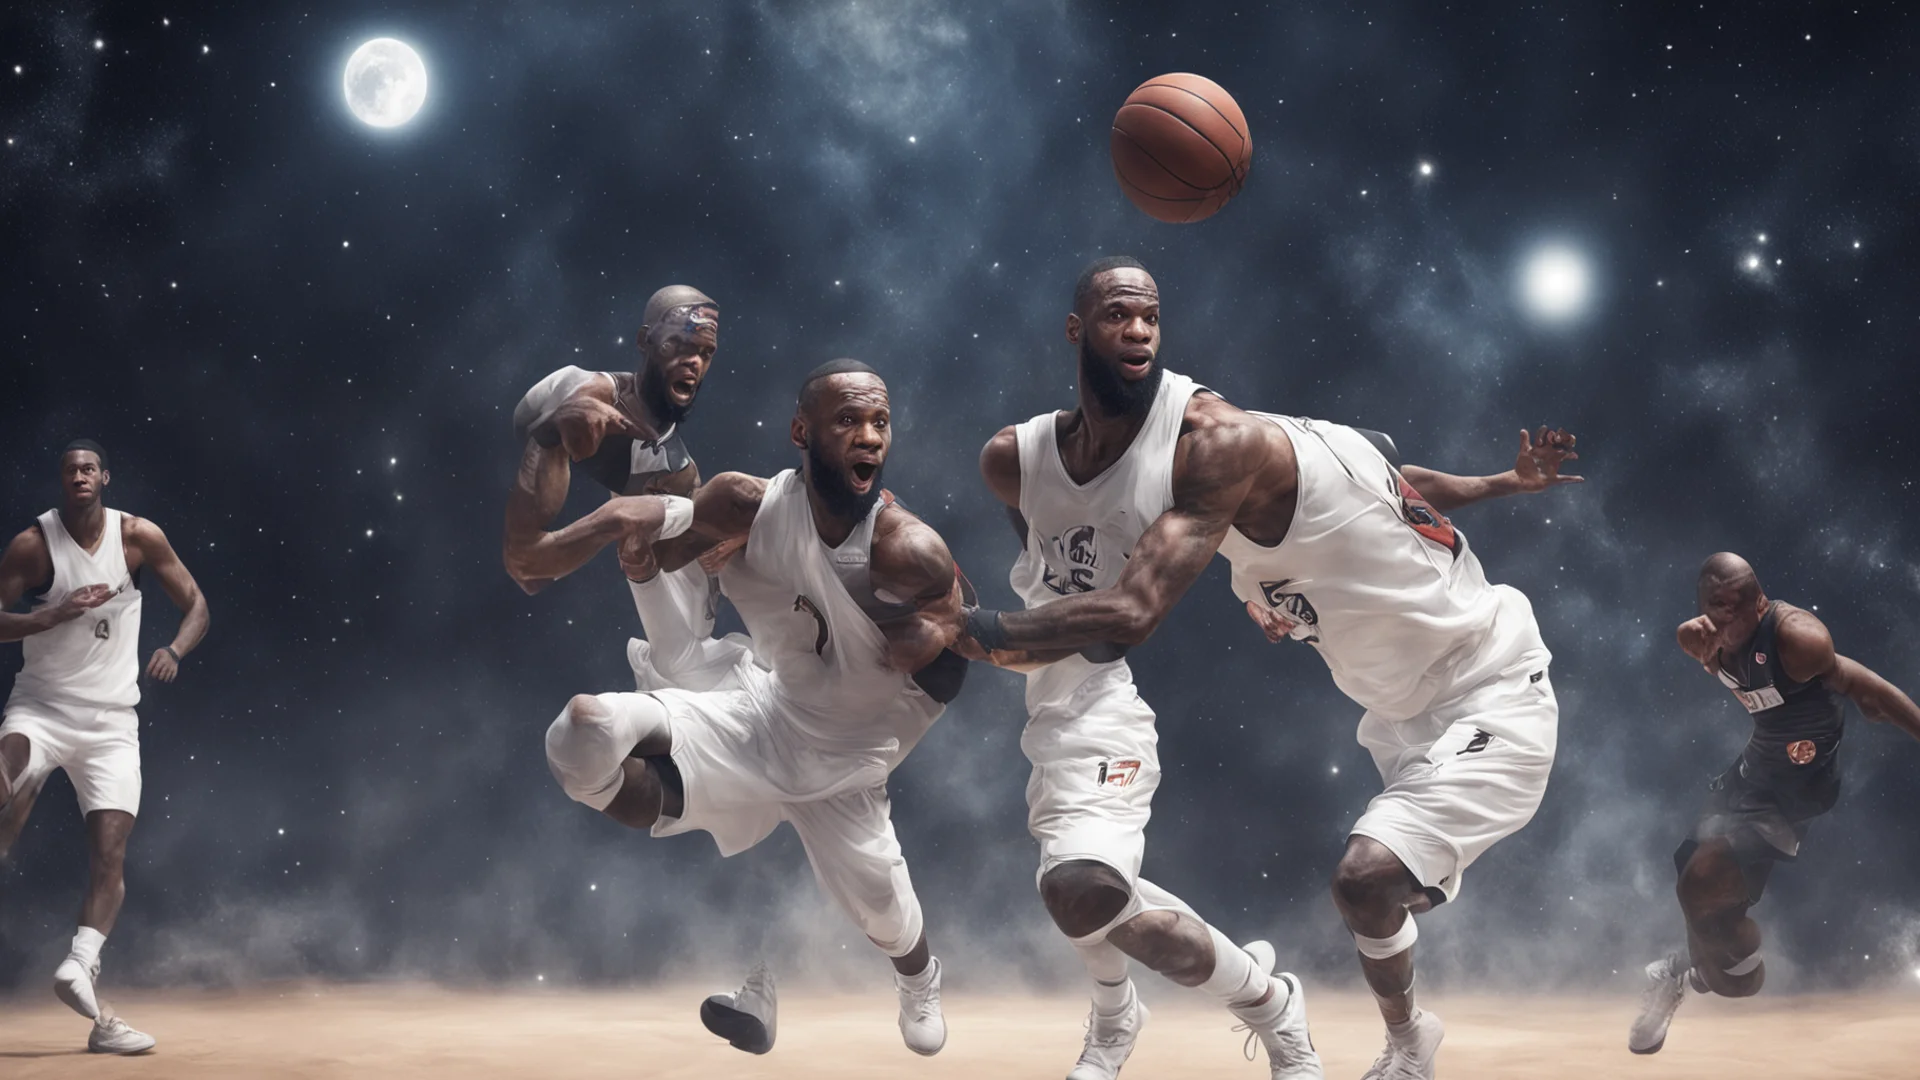 lebron james into the space playing basketball with aliens  wide